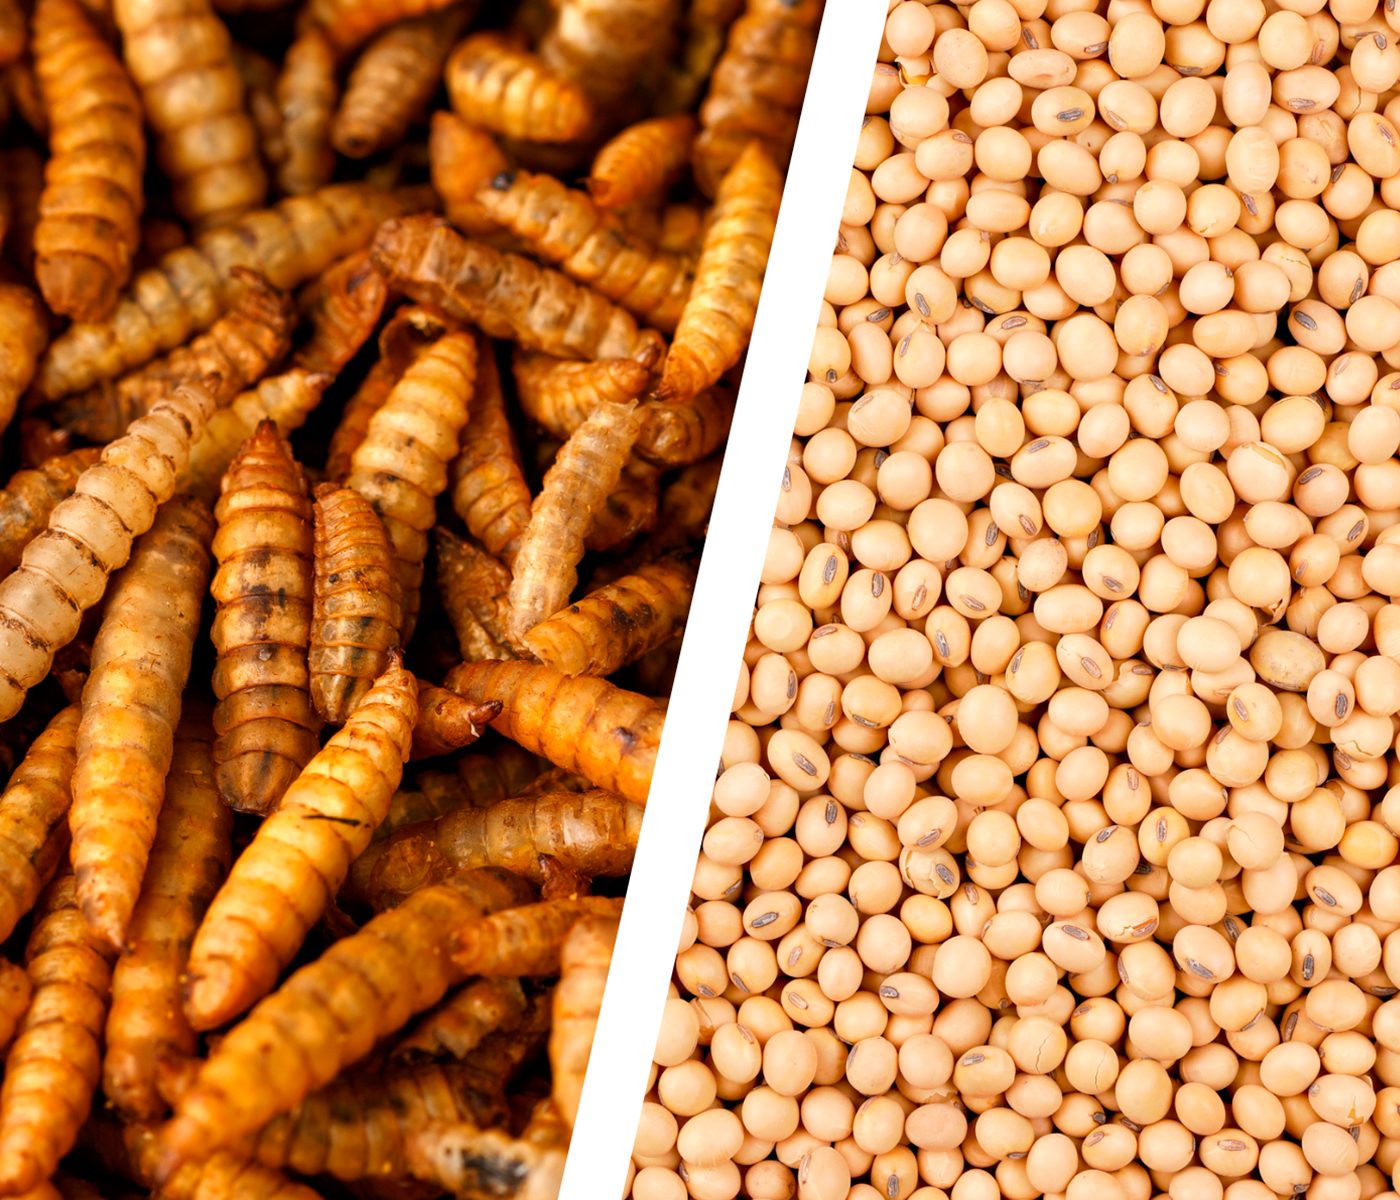 Insects a protein source for animal diets?